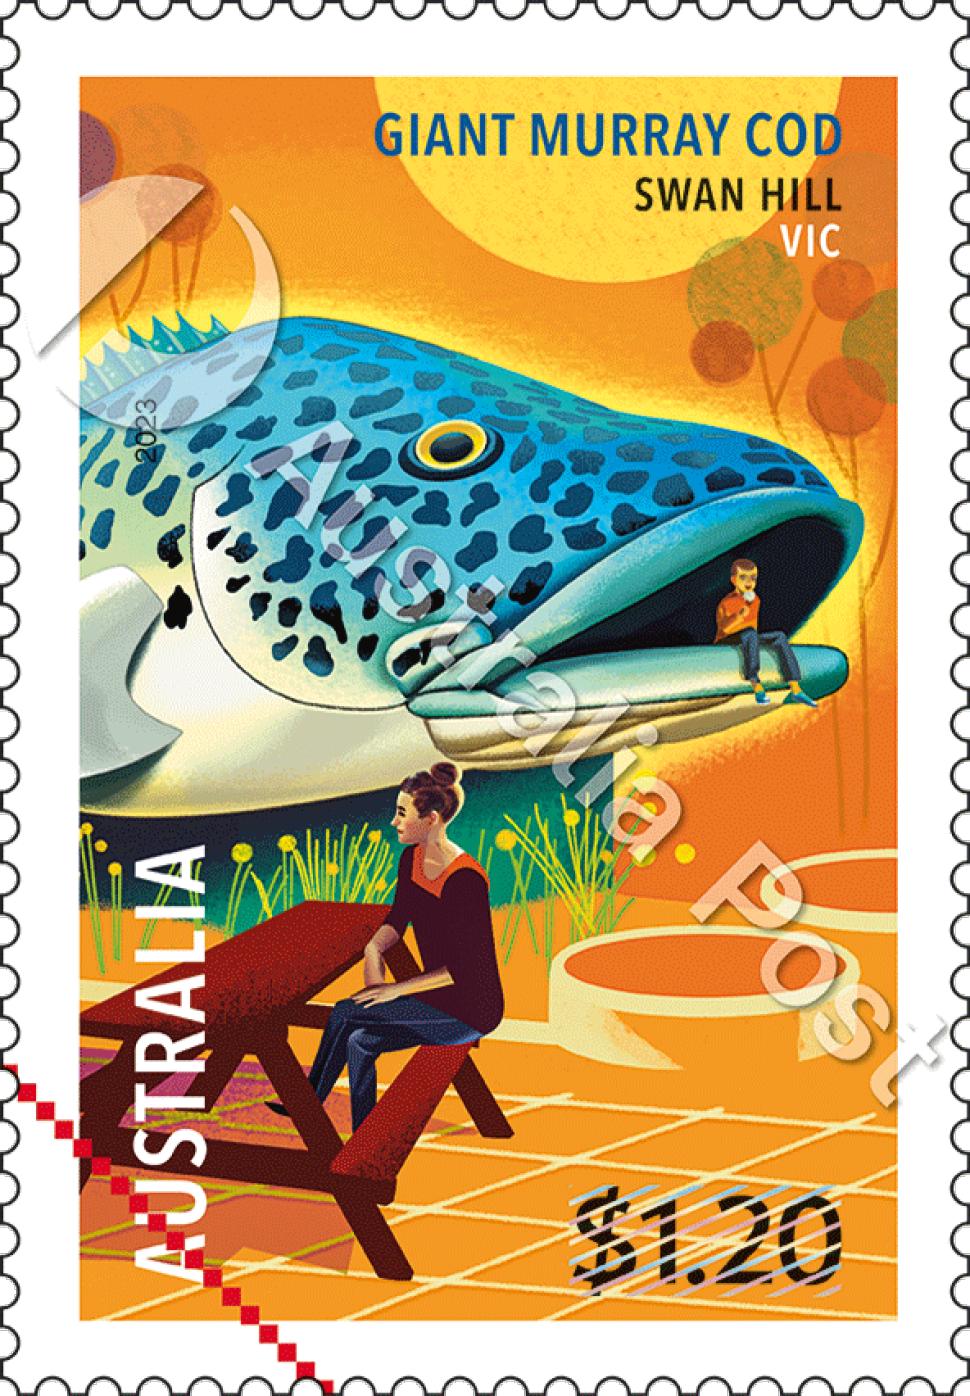 Giant Murray Cod $1.20 stamp